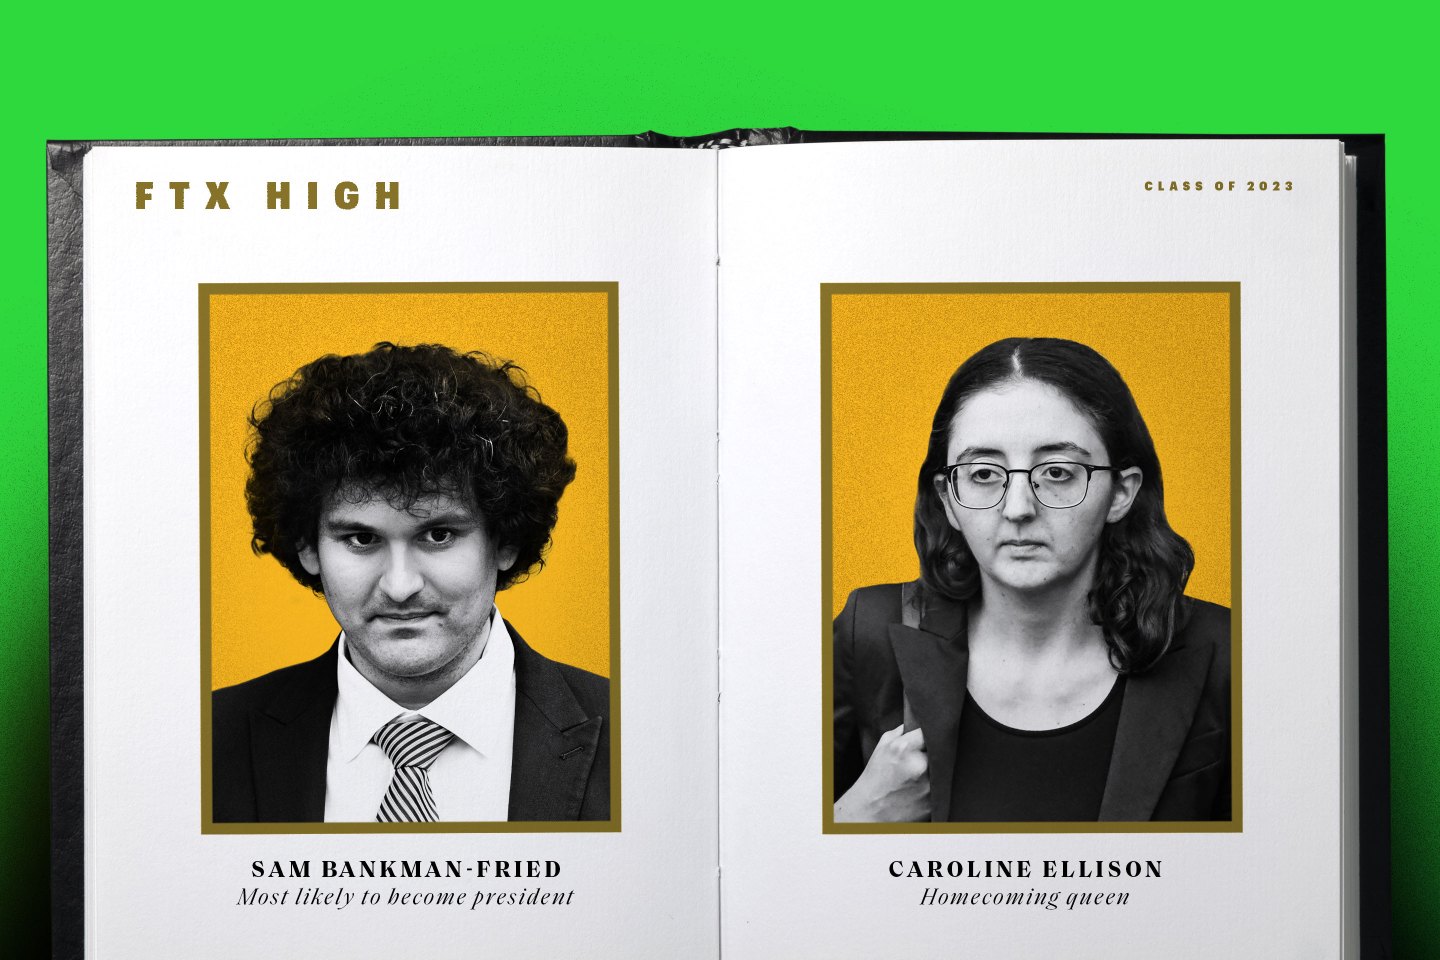 Artistic rendering of a page from a yearbook showing photos of Sam Bankman-Fried and Caroline Ellison